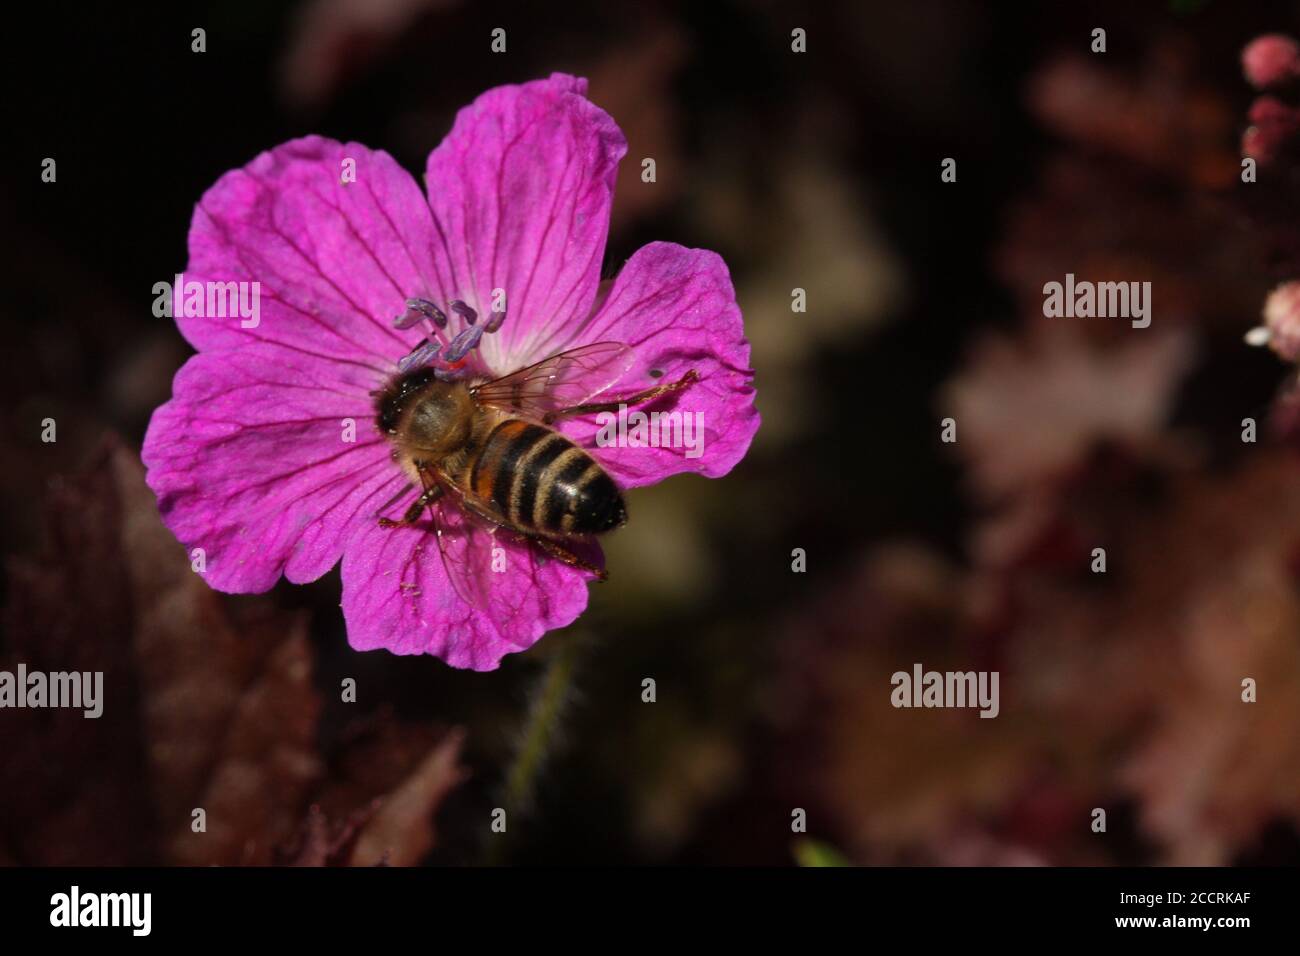 Bee gathering nectar from purple flower, Oxford, England, UK Stock Photo